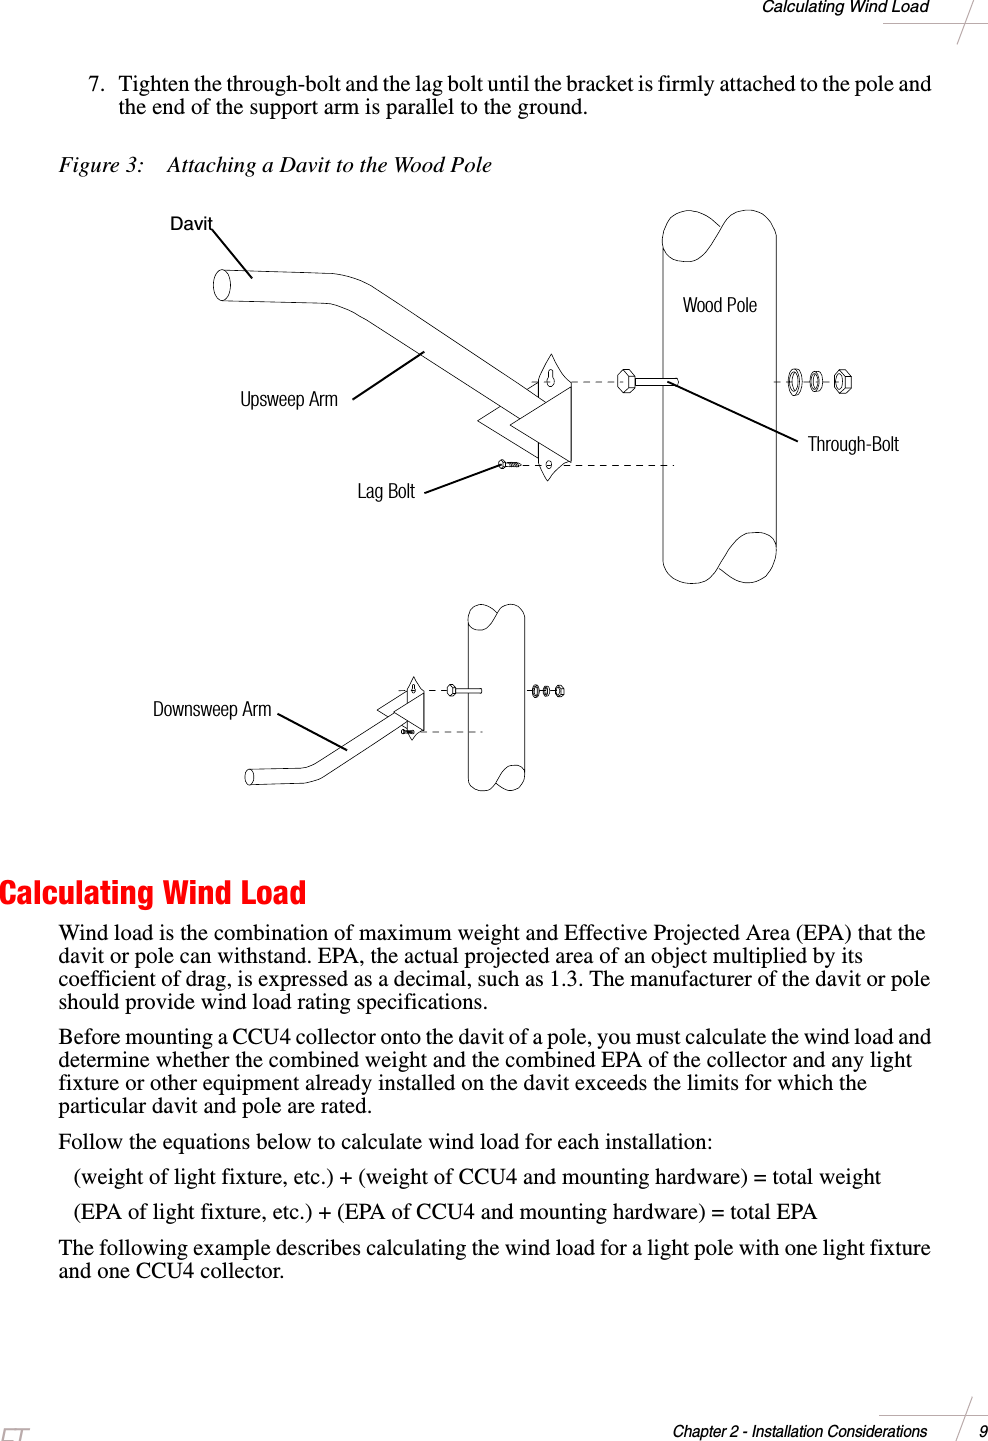 DRAFTChapter 2 - Installation Considerations 9Calculating Wind Load7. Tighten the through-bolt and the lag bolt until the bracket is firmly attached to the pole andthe end of the support arm is parallel to the ground.Figure 3: Attaching a Davit to the Wood PoleCalculating Wind LoadWind load is the combination of maximum weight and Effective Projected Area (EPA) that thedavit or pole can withstand. EPA, the actual projected area of an object multiplied by itscoefficient of drag, is expressed as a decimal, such as 1.3. The manufacturer of the davit or poleshould provide wind load rating specifications.Before mounting a CCU4 collector onto the davit of a pole, you must calculate the wind load anddetermine whether the combined weight and the combined EPA of the collector and any lightfixture or other equipment already installed on the davit exceeds the limits for which theparticular davit and pole are rated.Follow the equations below to calculate wind load for each installation:(weight of light fixture, etc.) + (weight of CCU4 and mounting hardware) = total weight(EPA of light fixture, etc.) + (EPA of CCU4 and mounting hardware) = total EPAThe following example describes calculating the wind load for a light pole with one light fixtureand one CCU4 collector.Wood PoleUpsweep ArmLag BoltThrough-BoltDownsweep ArmDavit